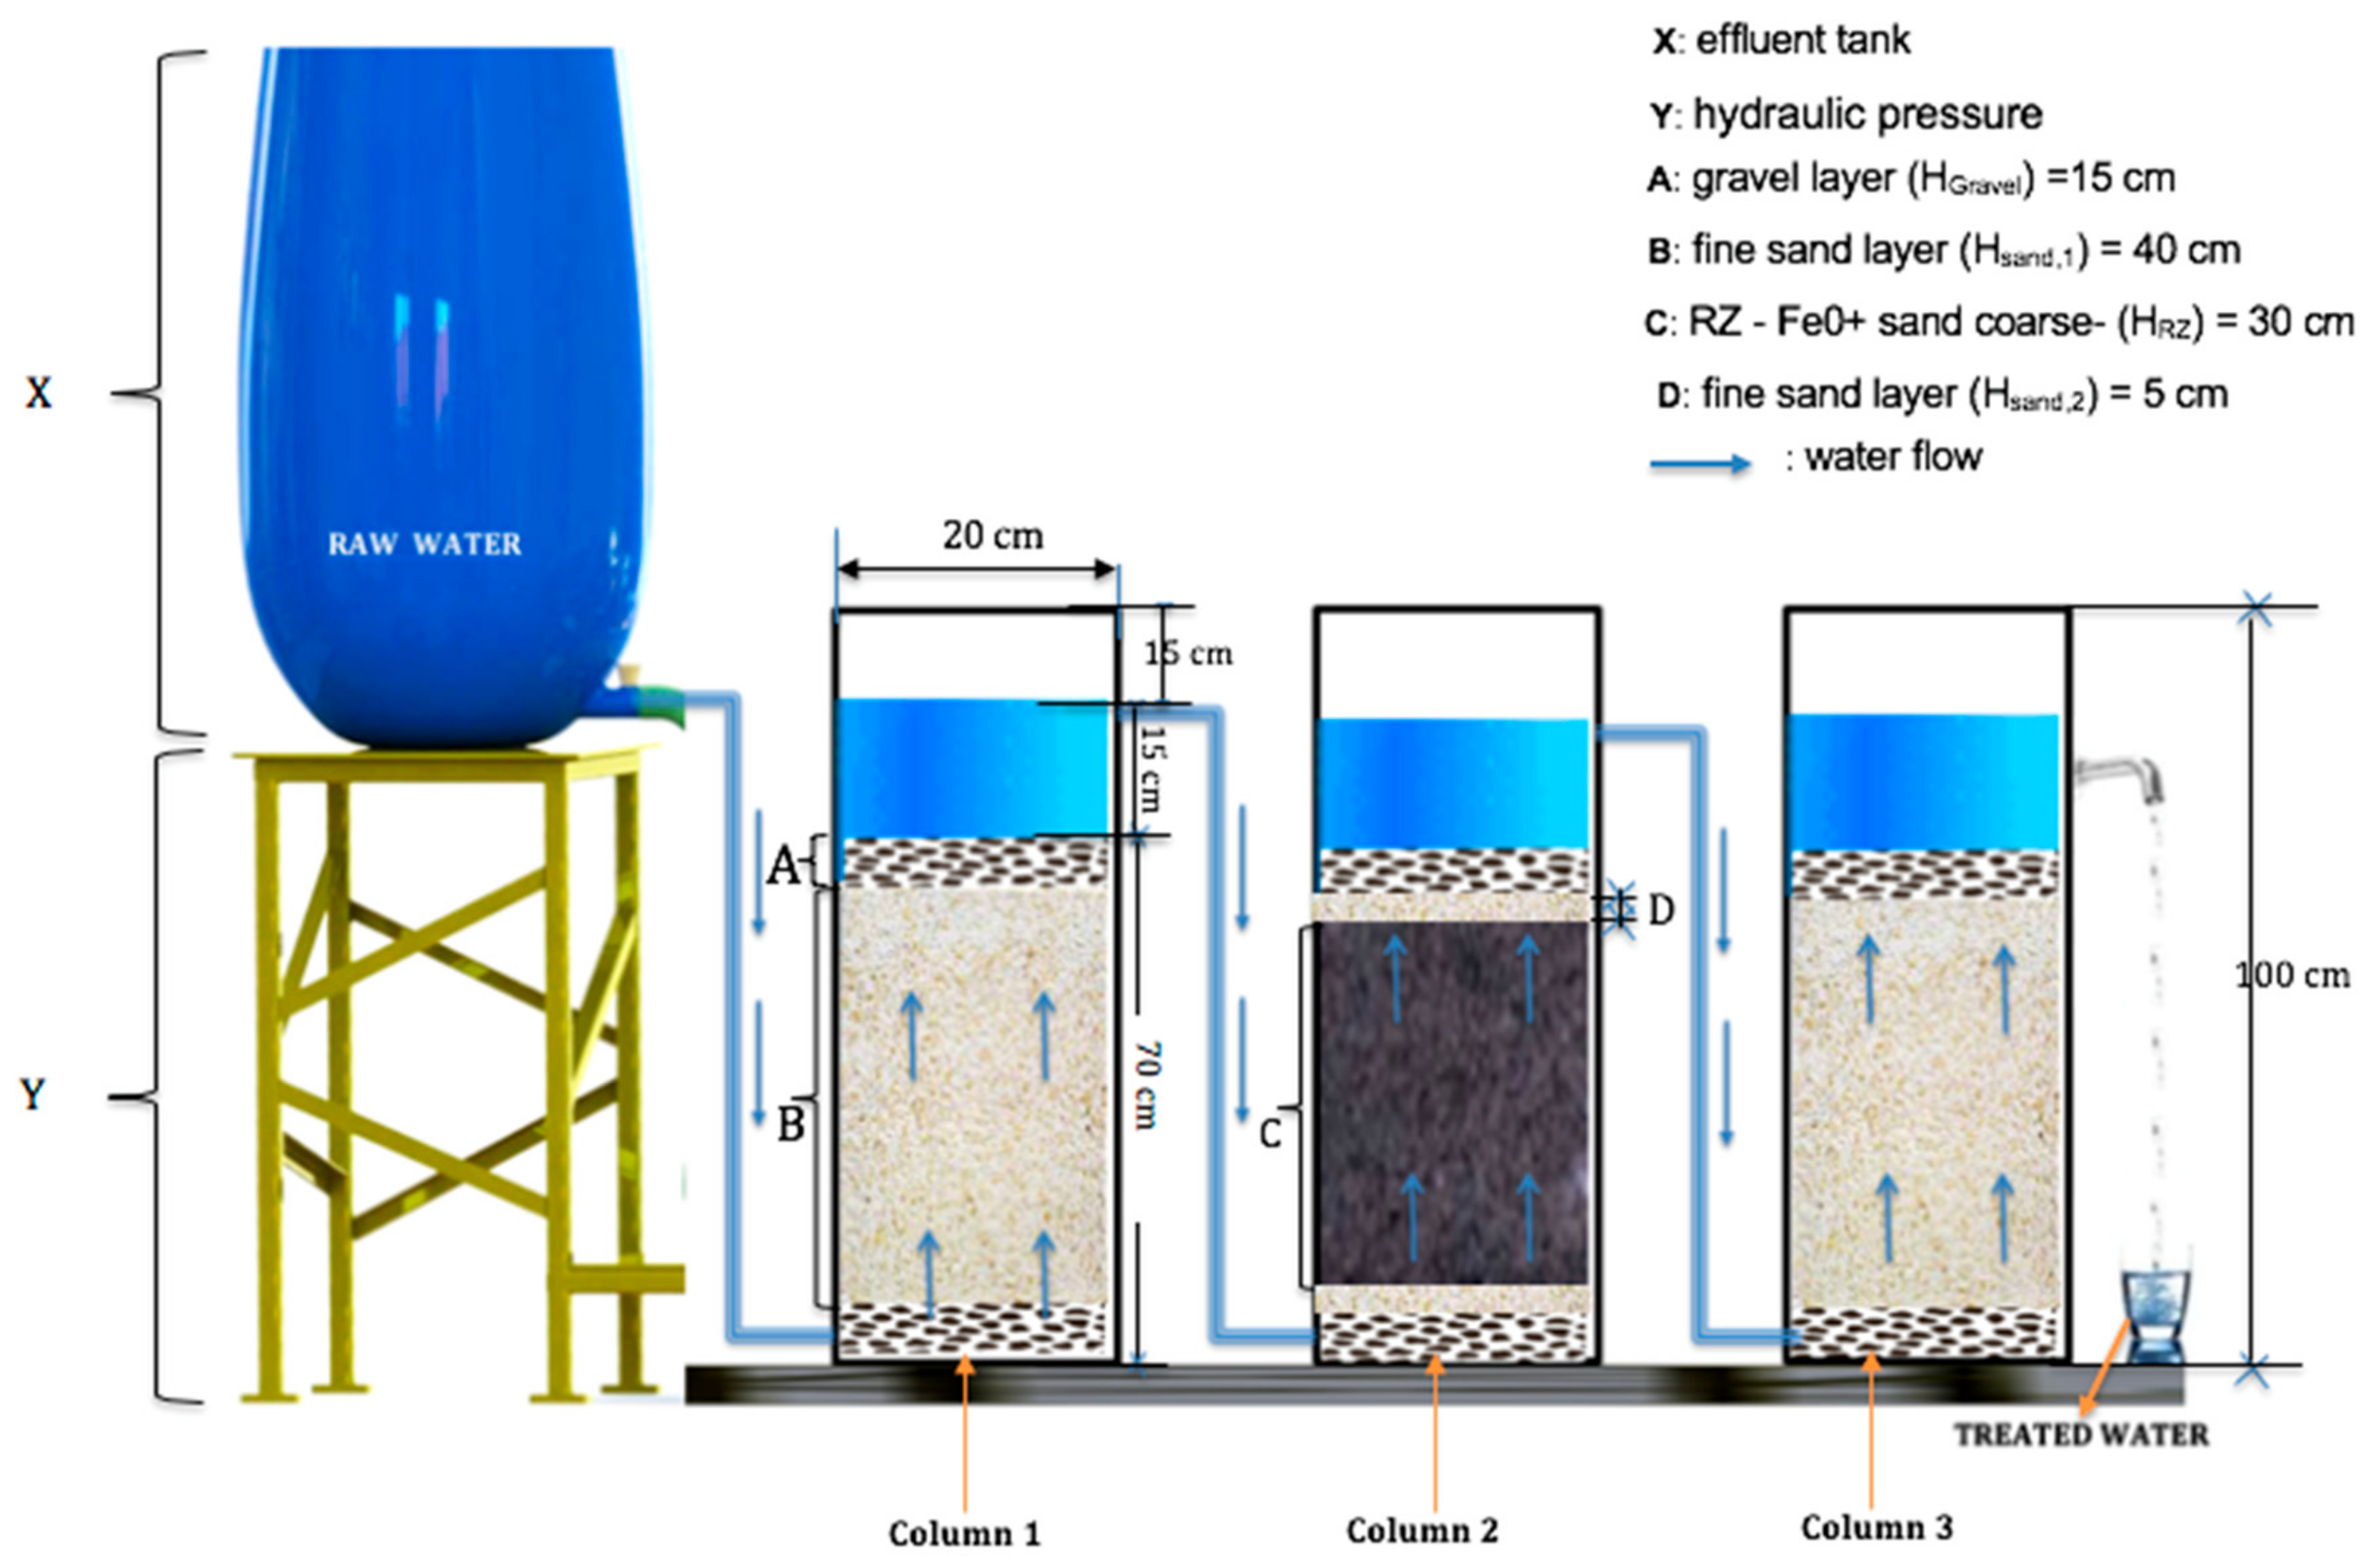 Processes | Free Full-Text | Characterizing a Newly Designed Steel-Wool-Based  Household Filter for Safe Drinking Water Provision: Hydraulic Conductivity  and Efficiency for Pathogen Removal | HTML